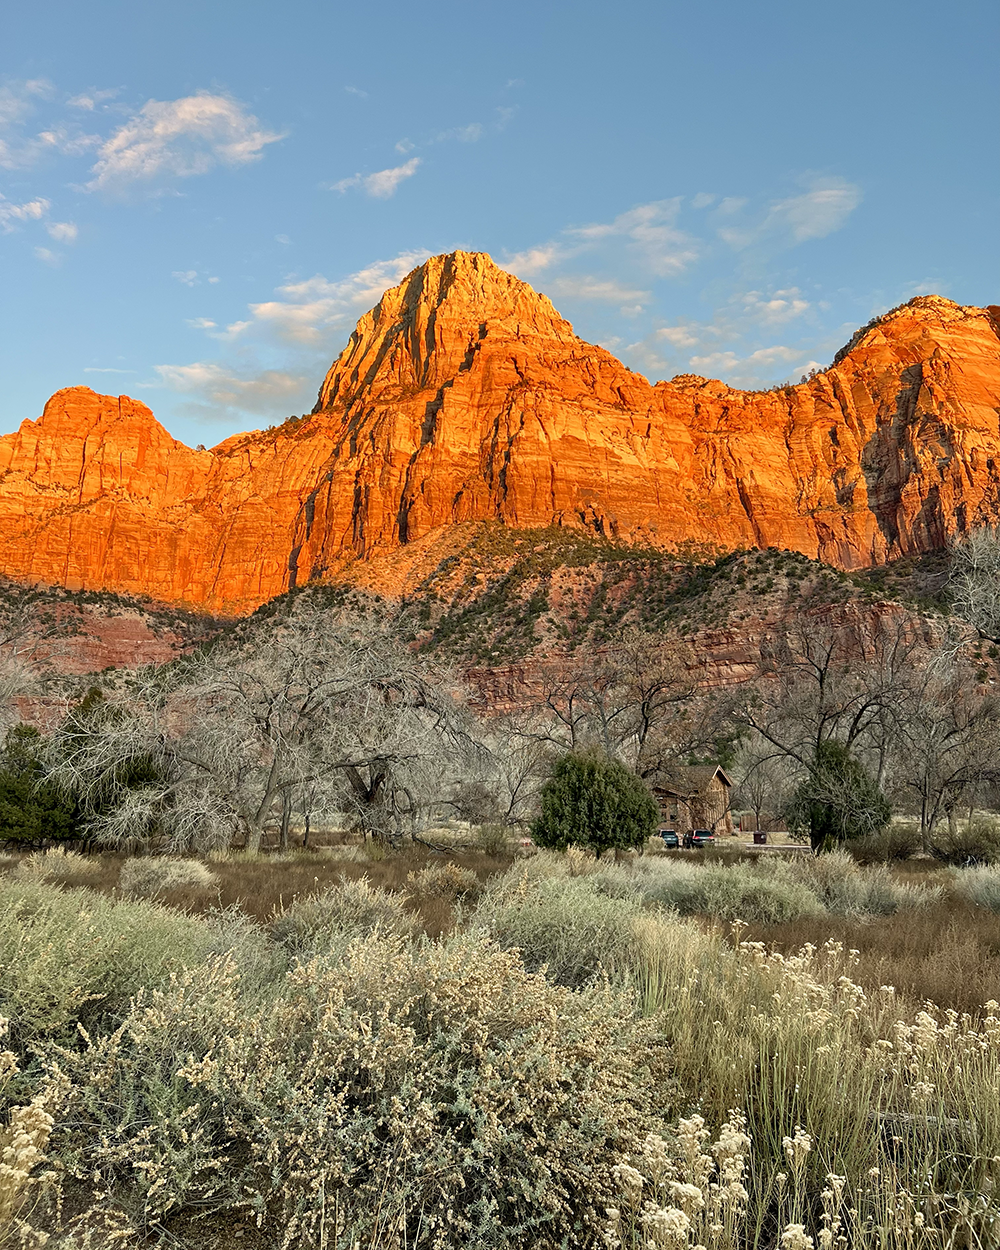  Took a rest day in Zion National Park and caught a gorgeous sunset.  